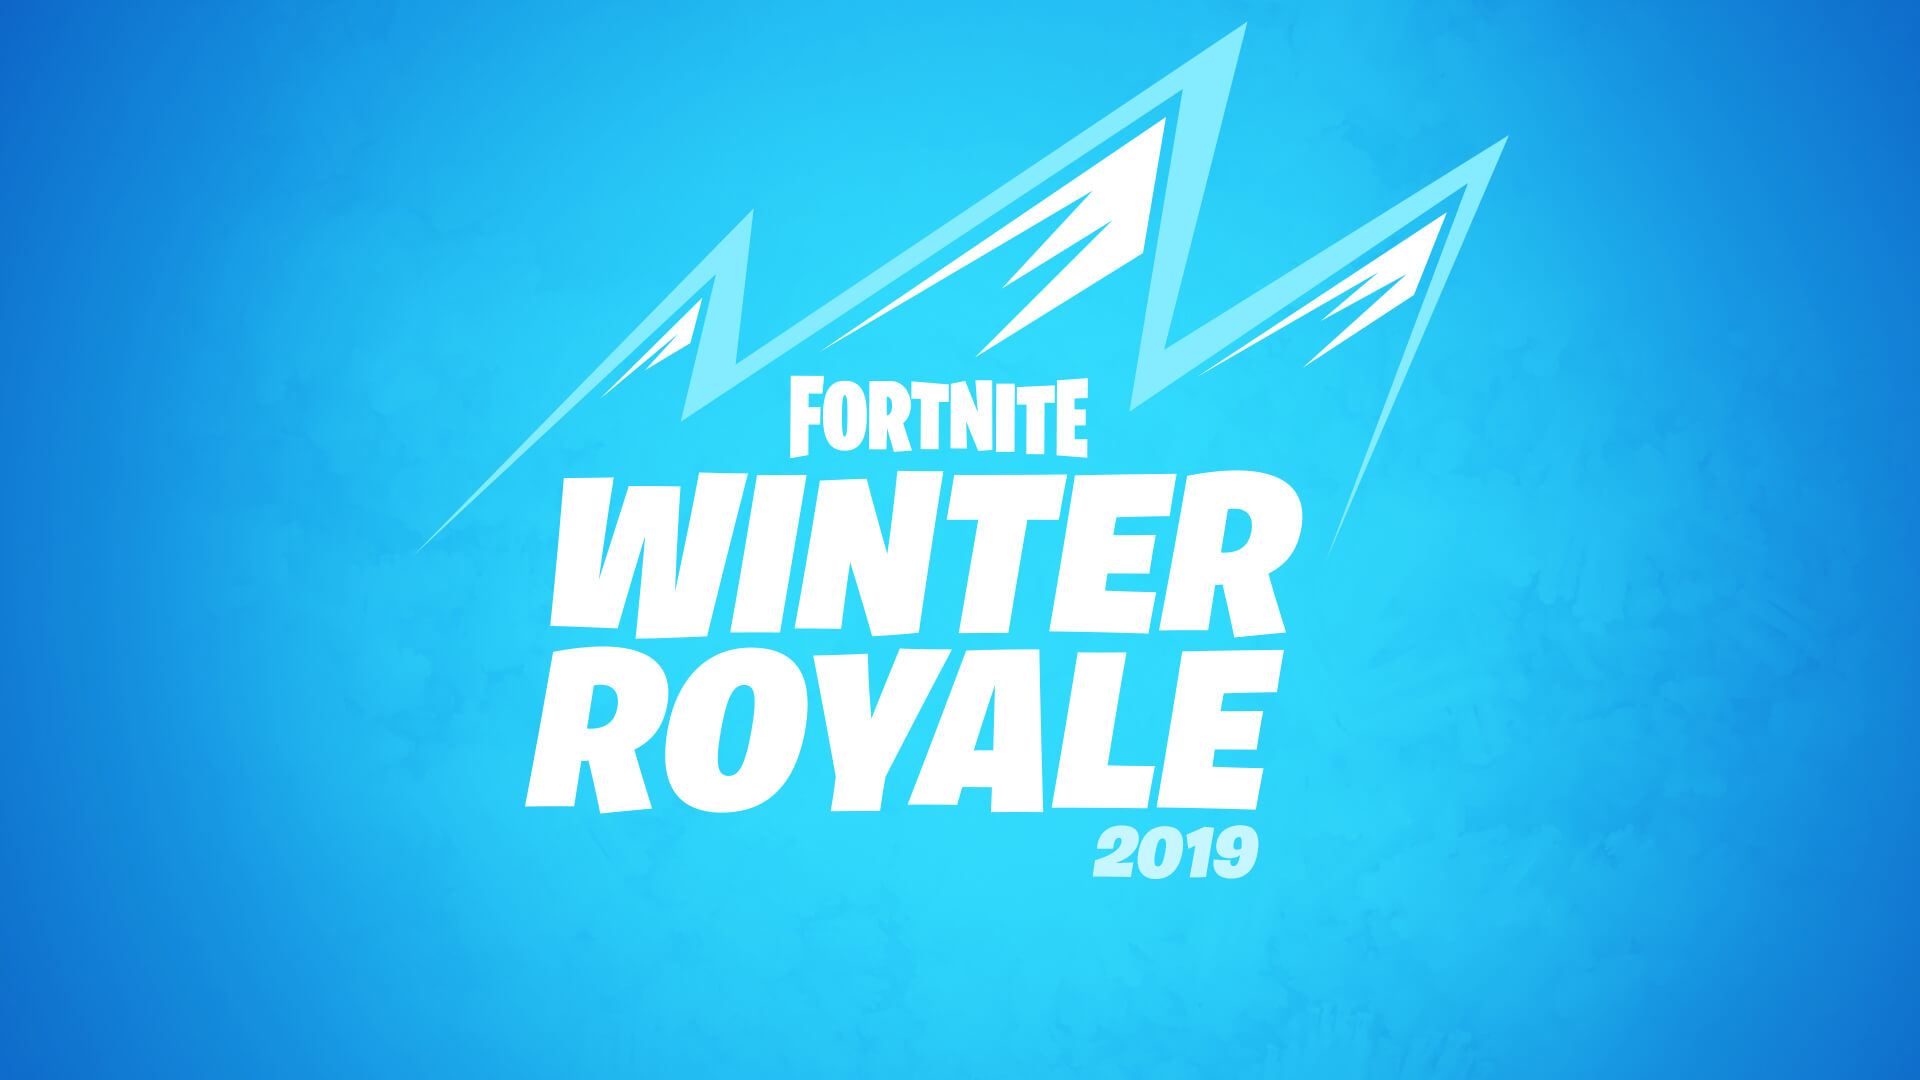 Winter Royale 2019: Everything you need to know ahead of the $15,000,000 tournament